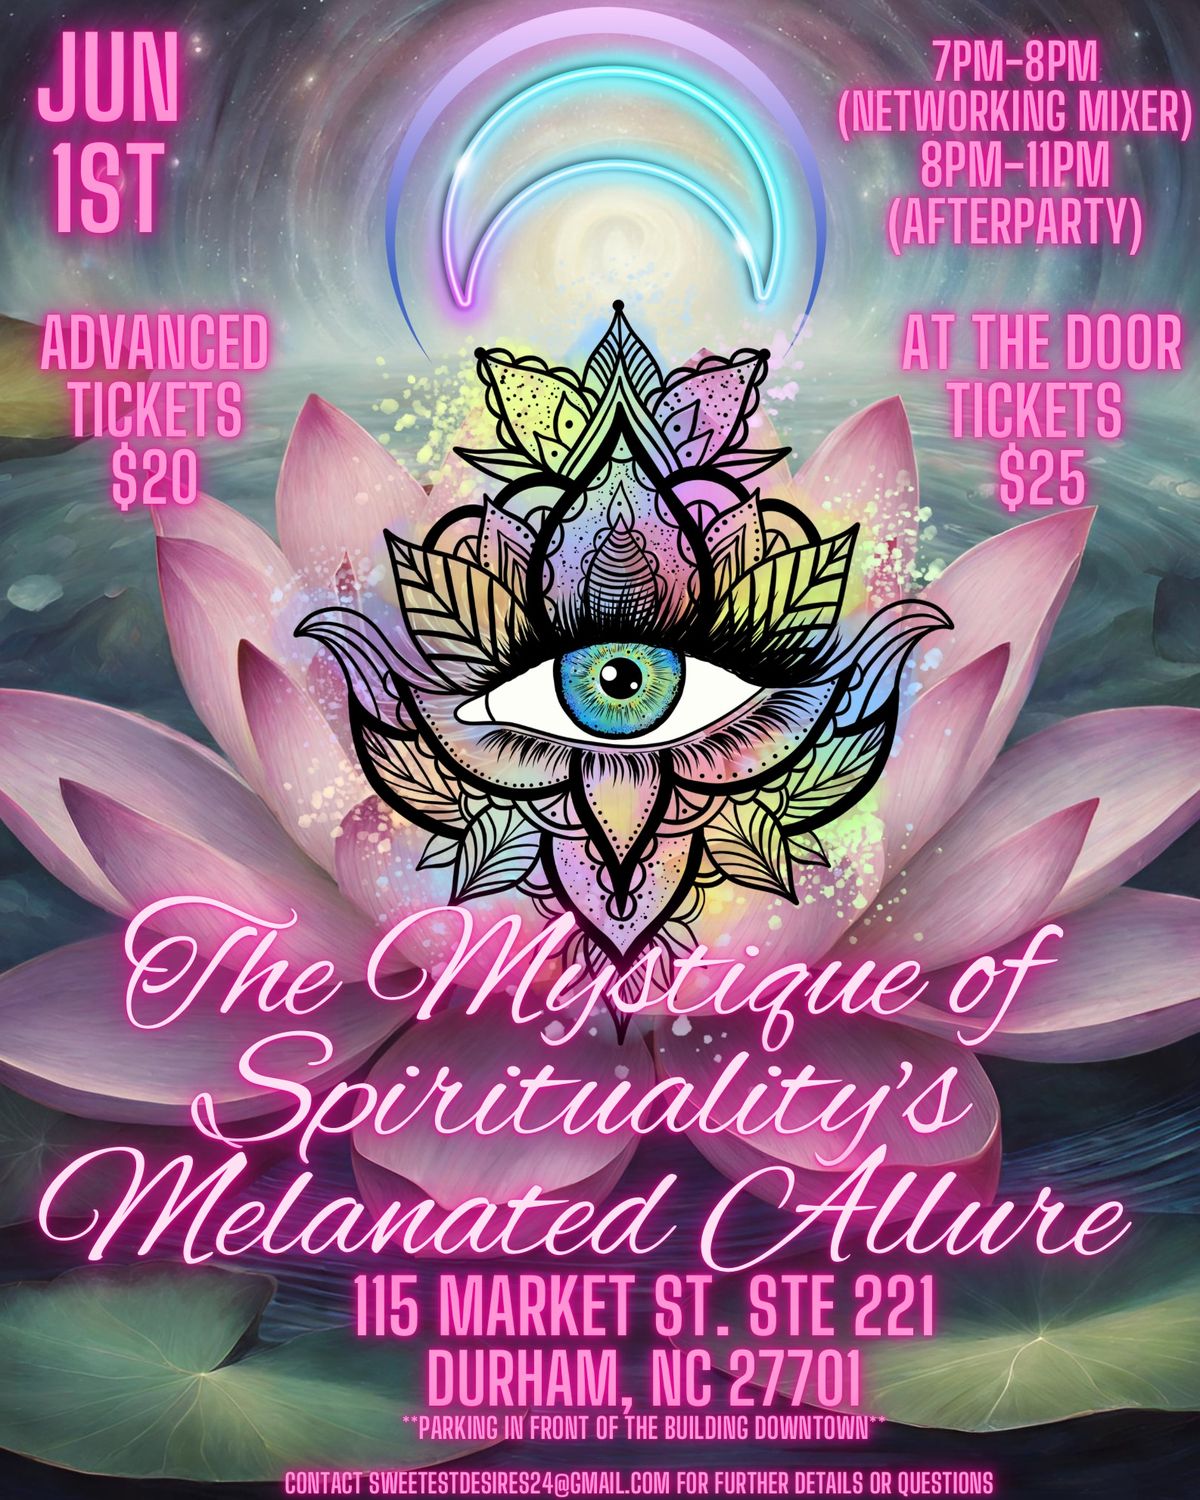 Spiritual Networking Mixer & Afterparty